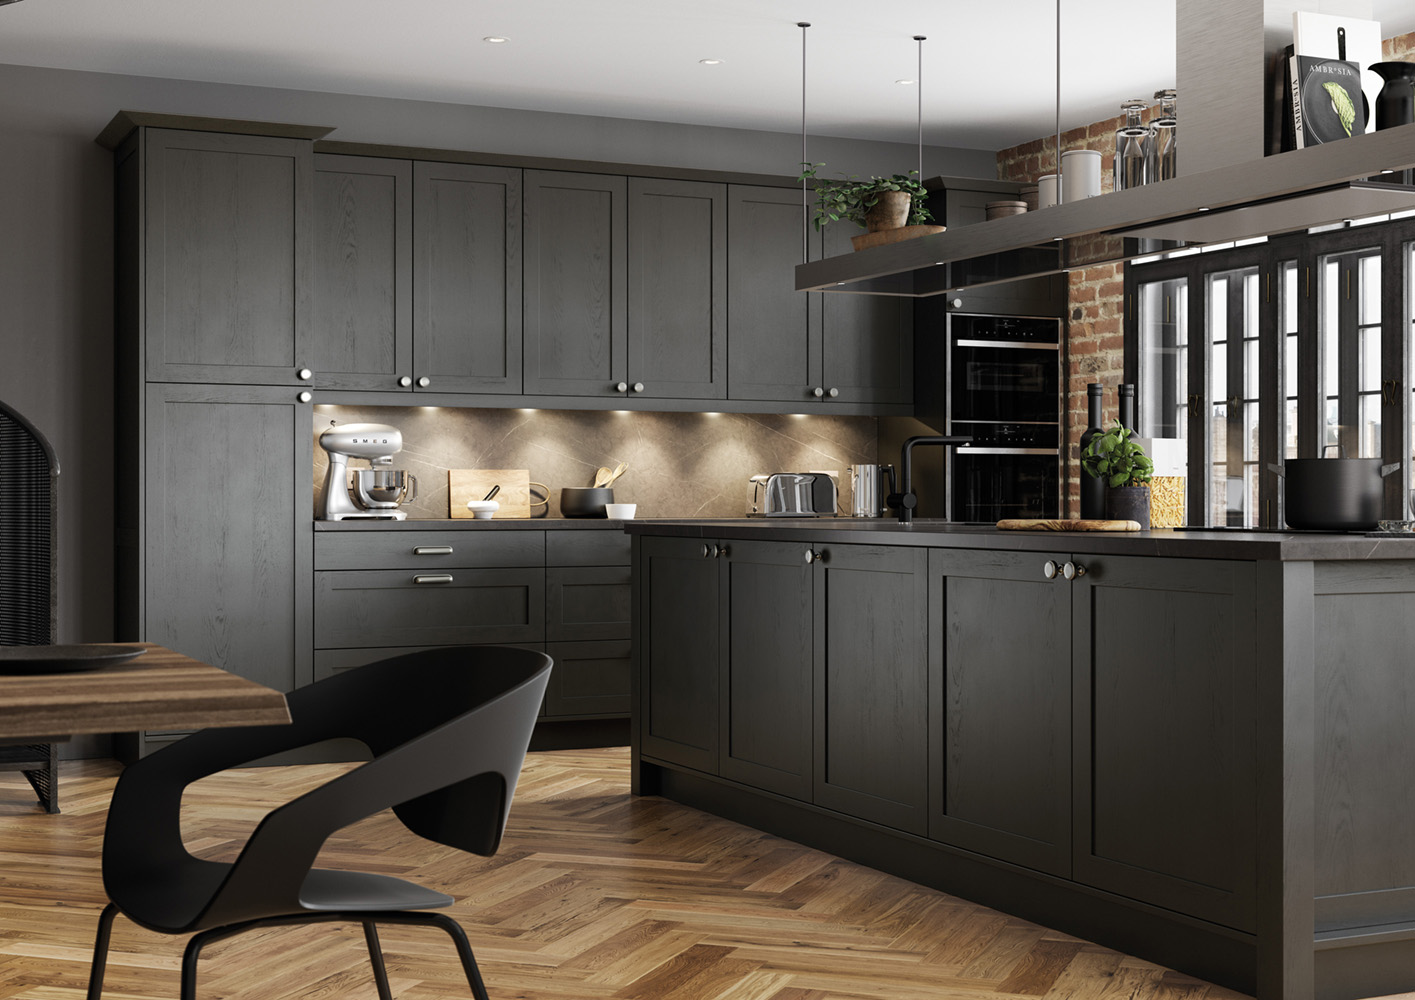 Alana Graphite Grey shaker kitchen design by The Kitchen Depot featuring island and seating